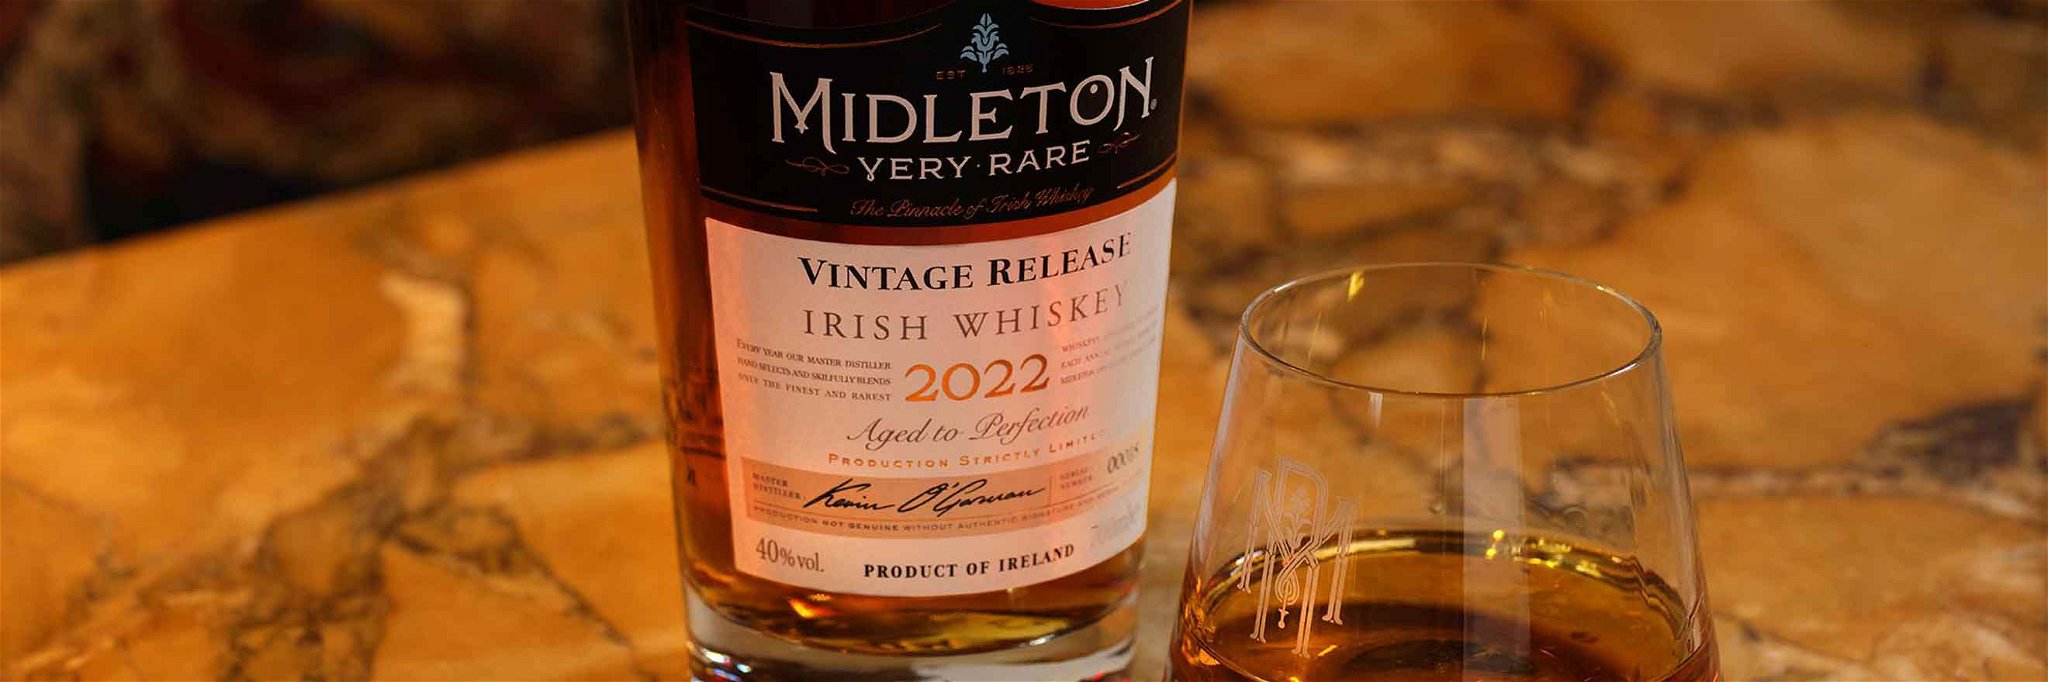 The 2022 vintage of Midleton Very Rare